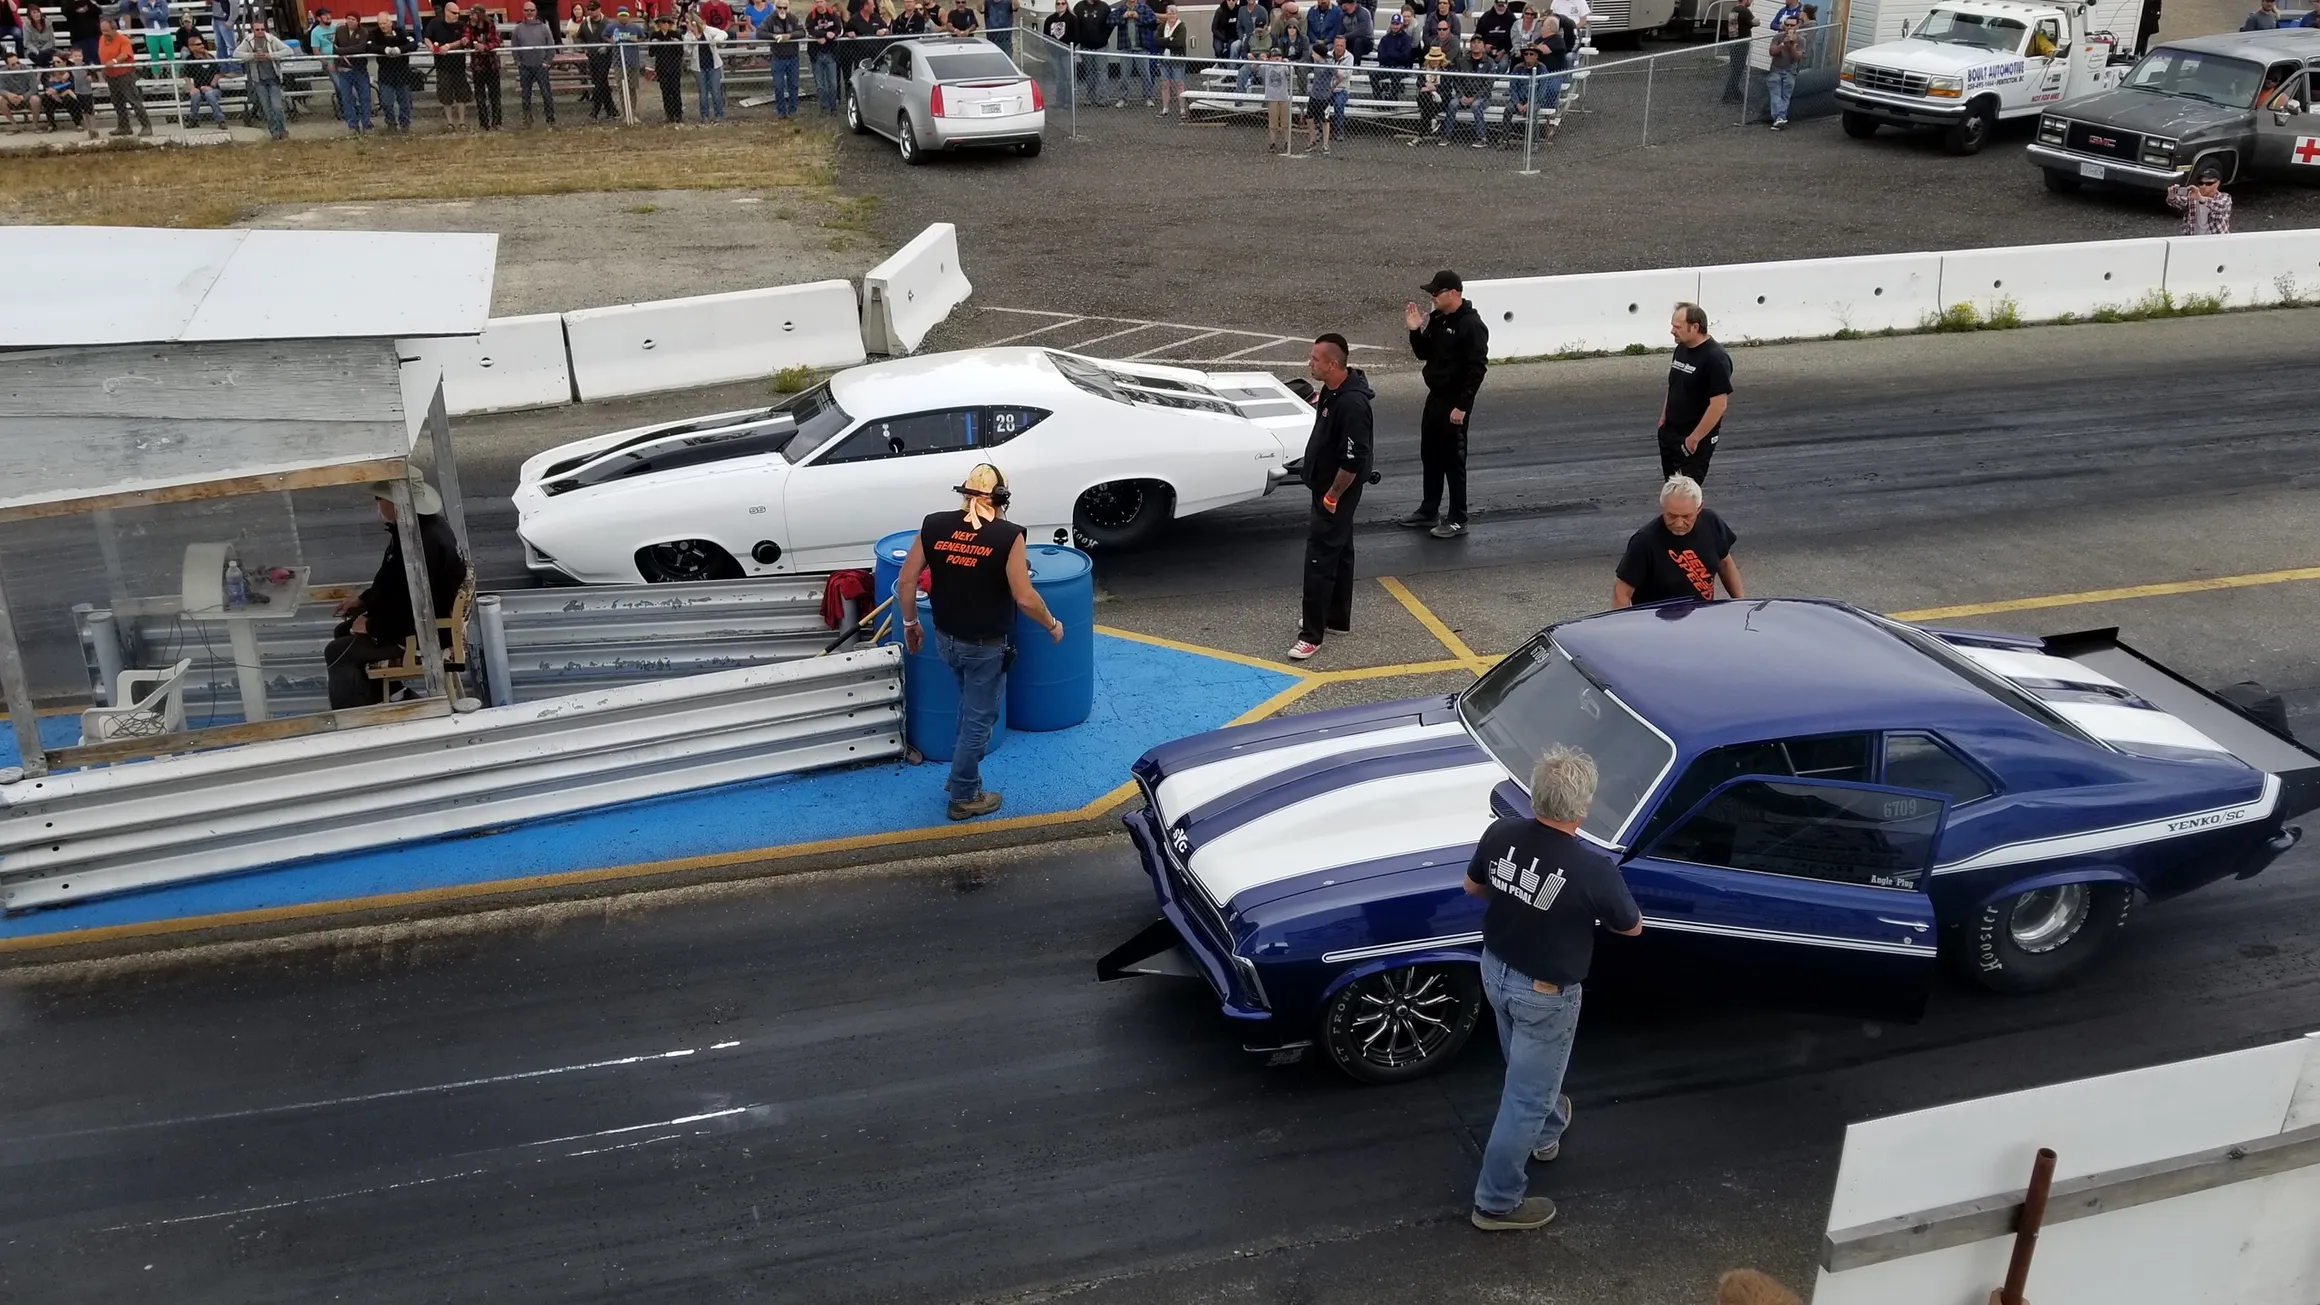 Thunder Mountain Raceway | Blue and white striped car on track